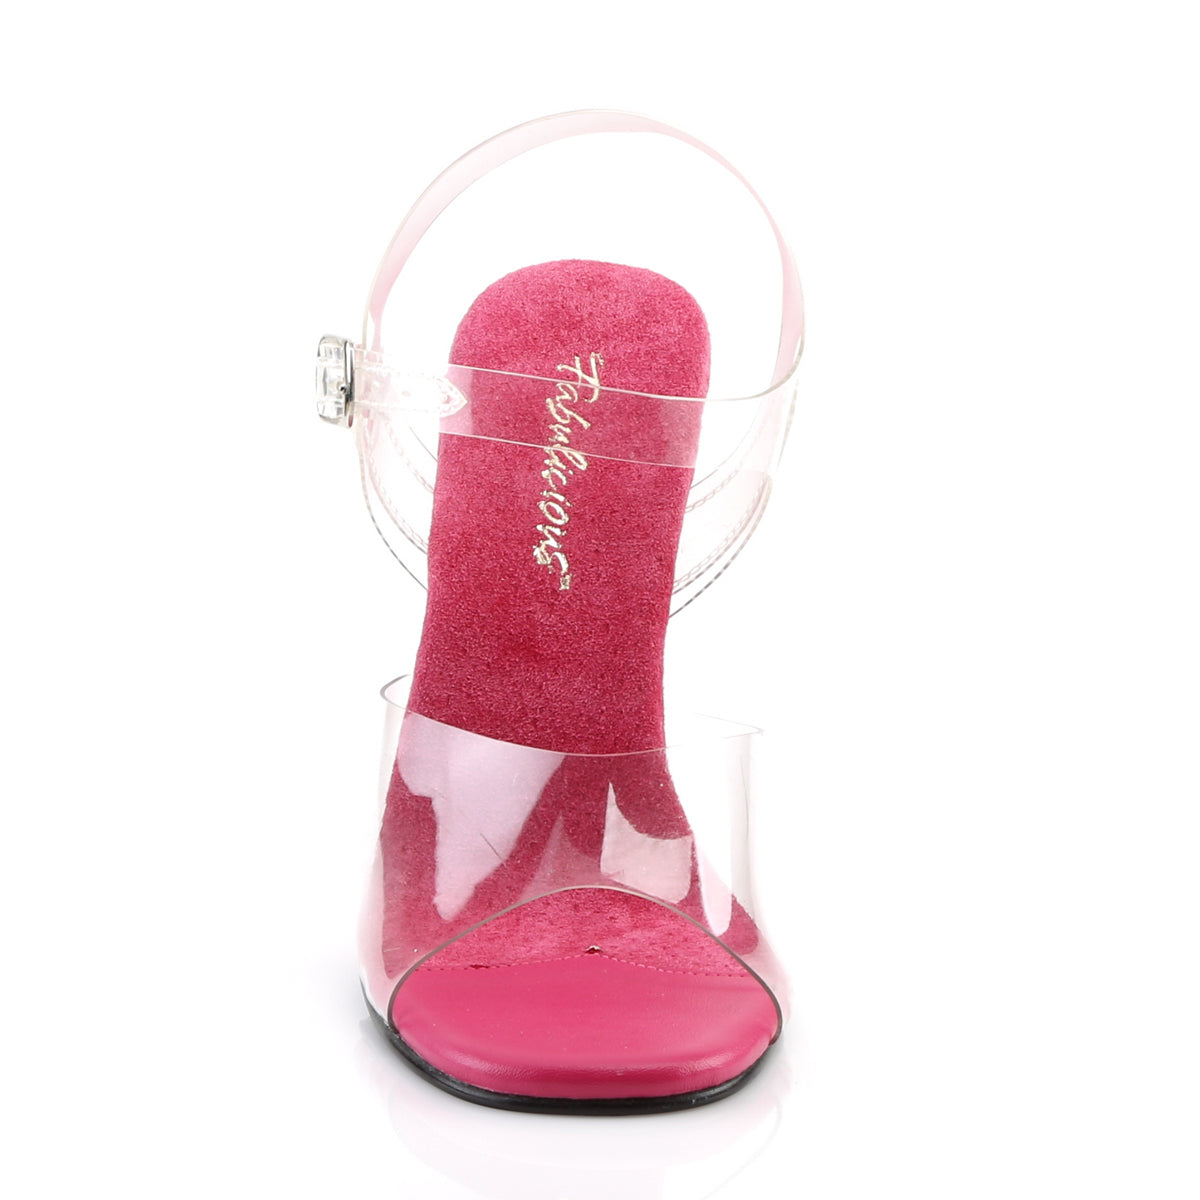 GALA-08 Exotic Dancing Fabulicious Shoes Clear-Raspberry/Raspberry Matte